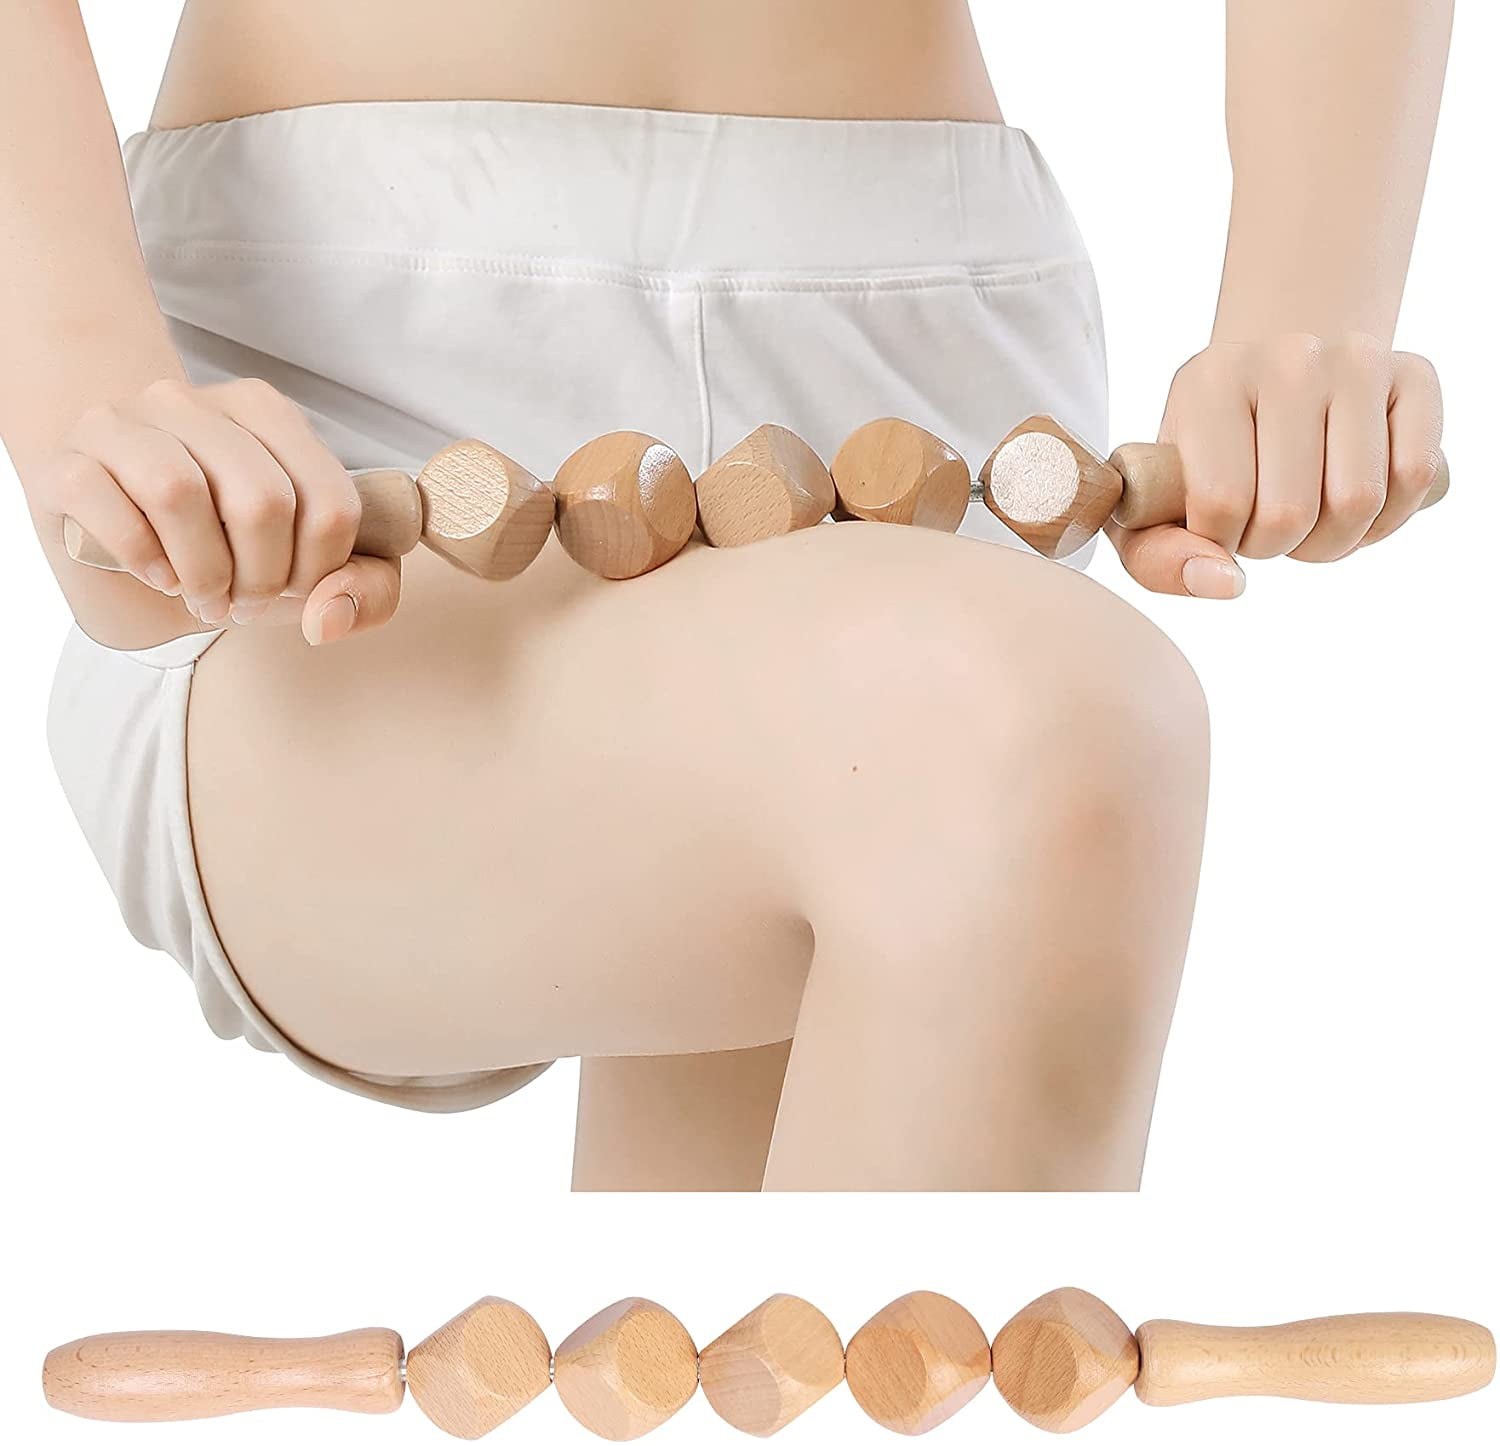 Wood Therapy Roller Massage Tool, Lymphatic Drainage, Wooden Massage &  Muscle Roller Stick | Beech Maderoterapia Rolling Body Massager for Pain